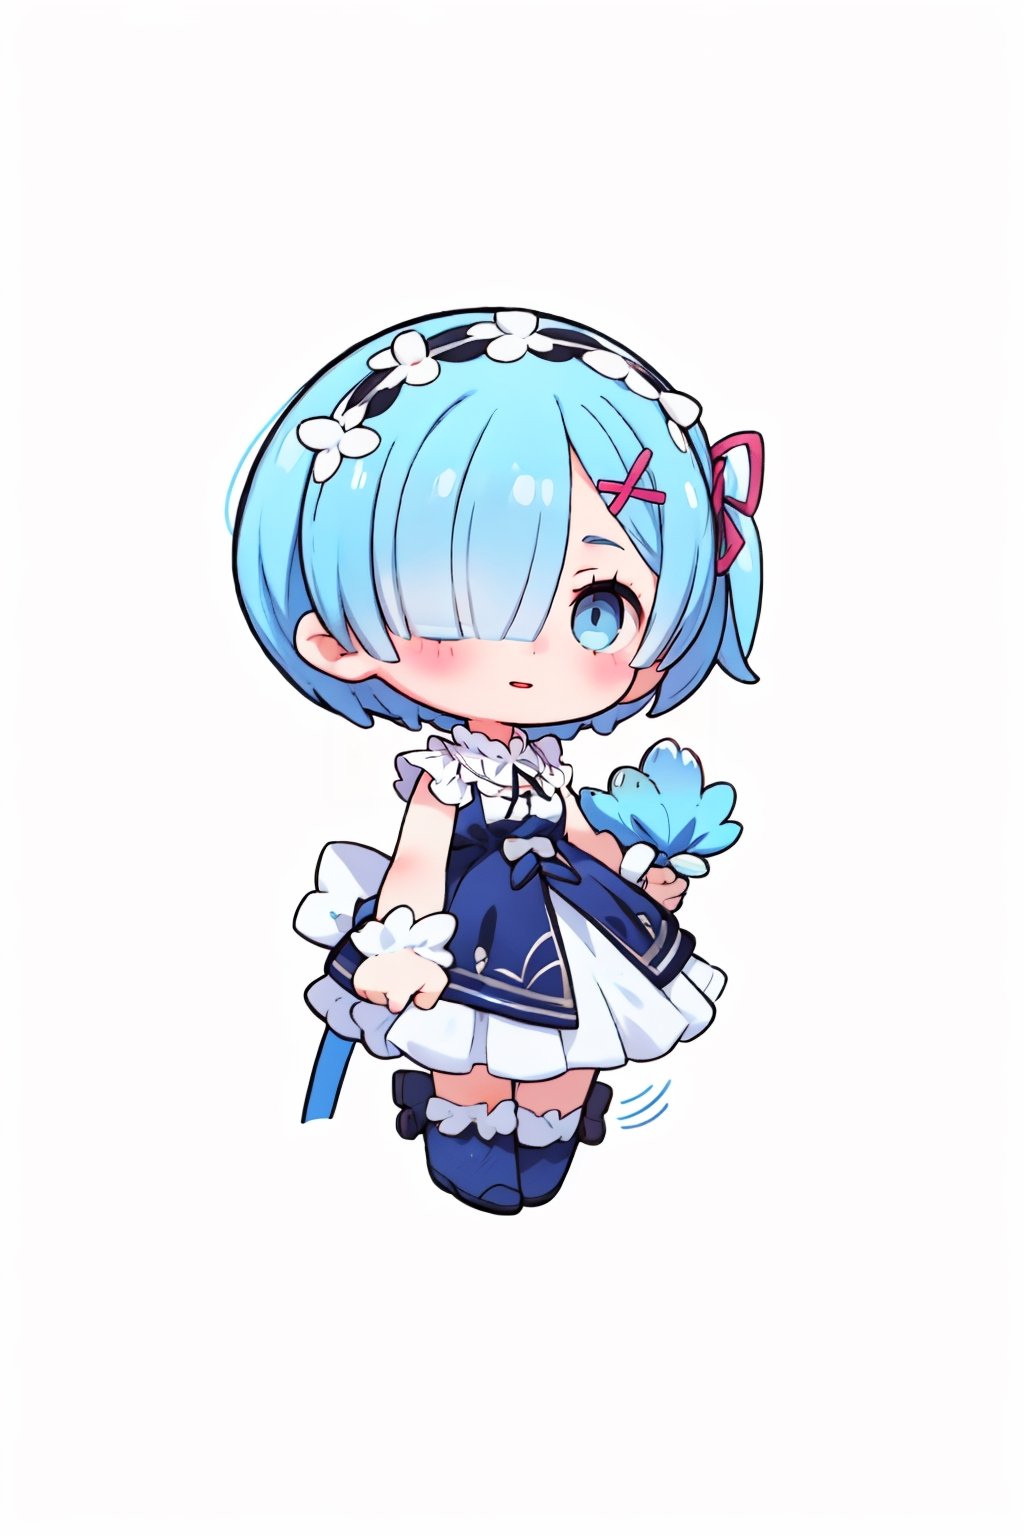 one Female,Chibi character,Educator,soft hair, short hair,Dark gray eyes,Intellectual smile, flat chest,BREAK,Simple sleeveless maid dress,simple skirt,BREAK,aausagi,She has sky blue hair that covers her right eye, large light blue eyes and has hair clips towards the left side of her hair, a flower-shaped ribbon on the same side of her hair, and a maid hairband,rem, simple background